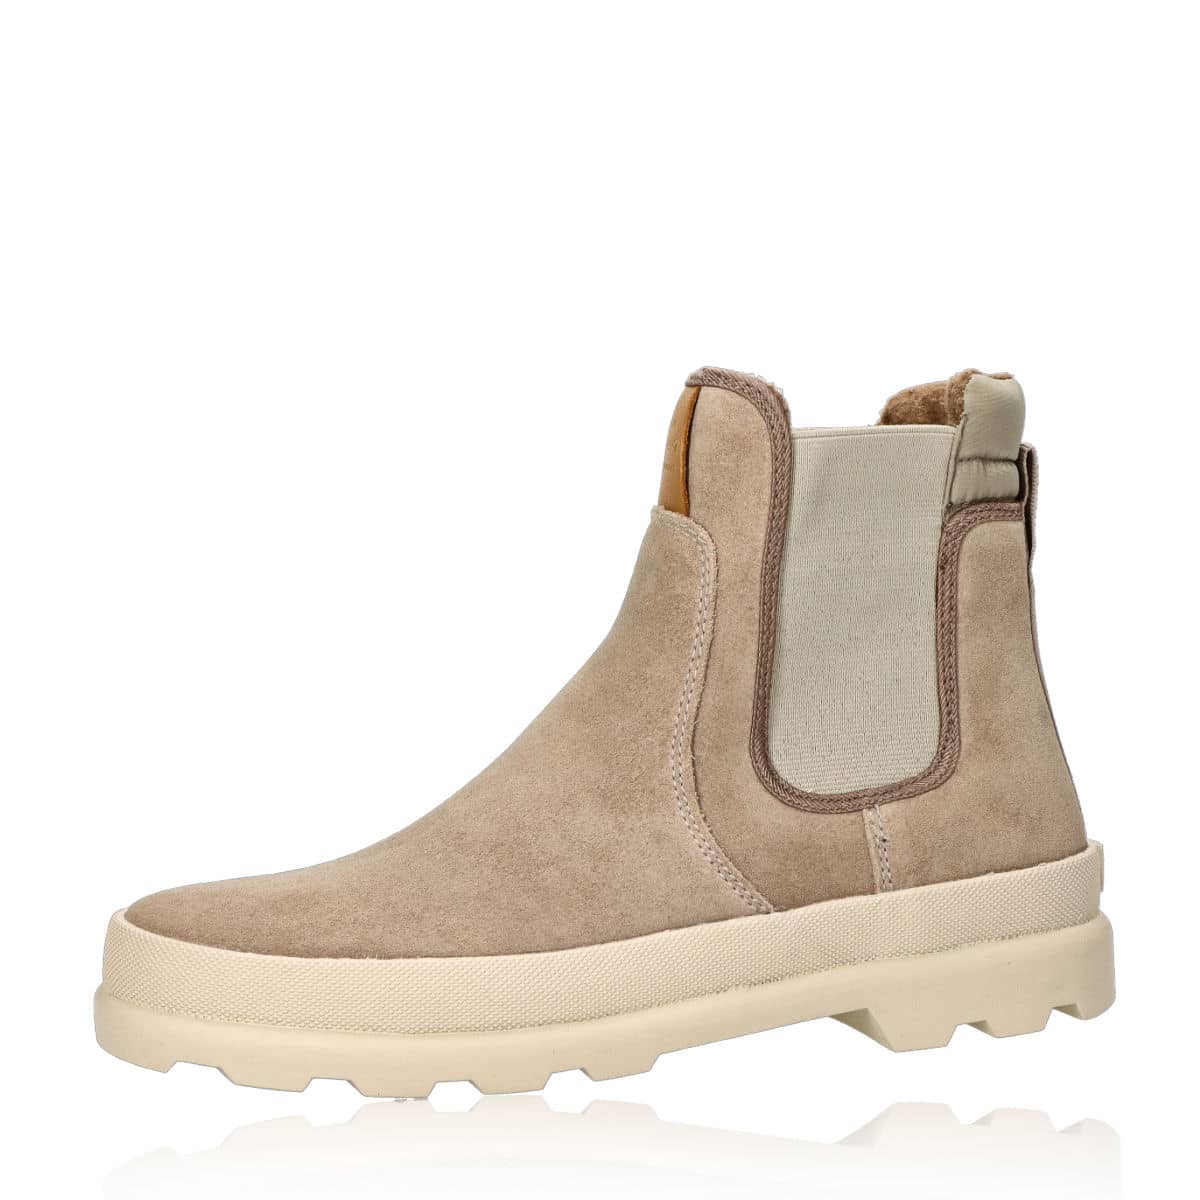 Gant women's suede ankle boots -